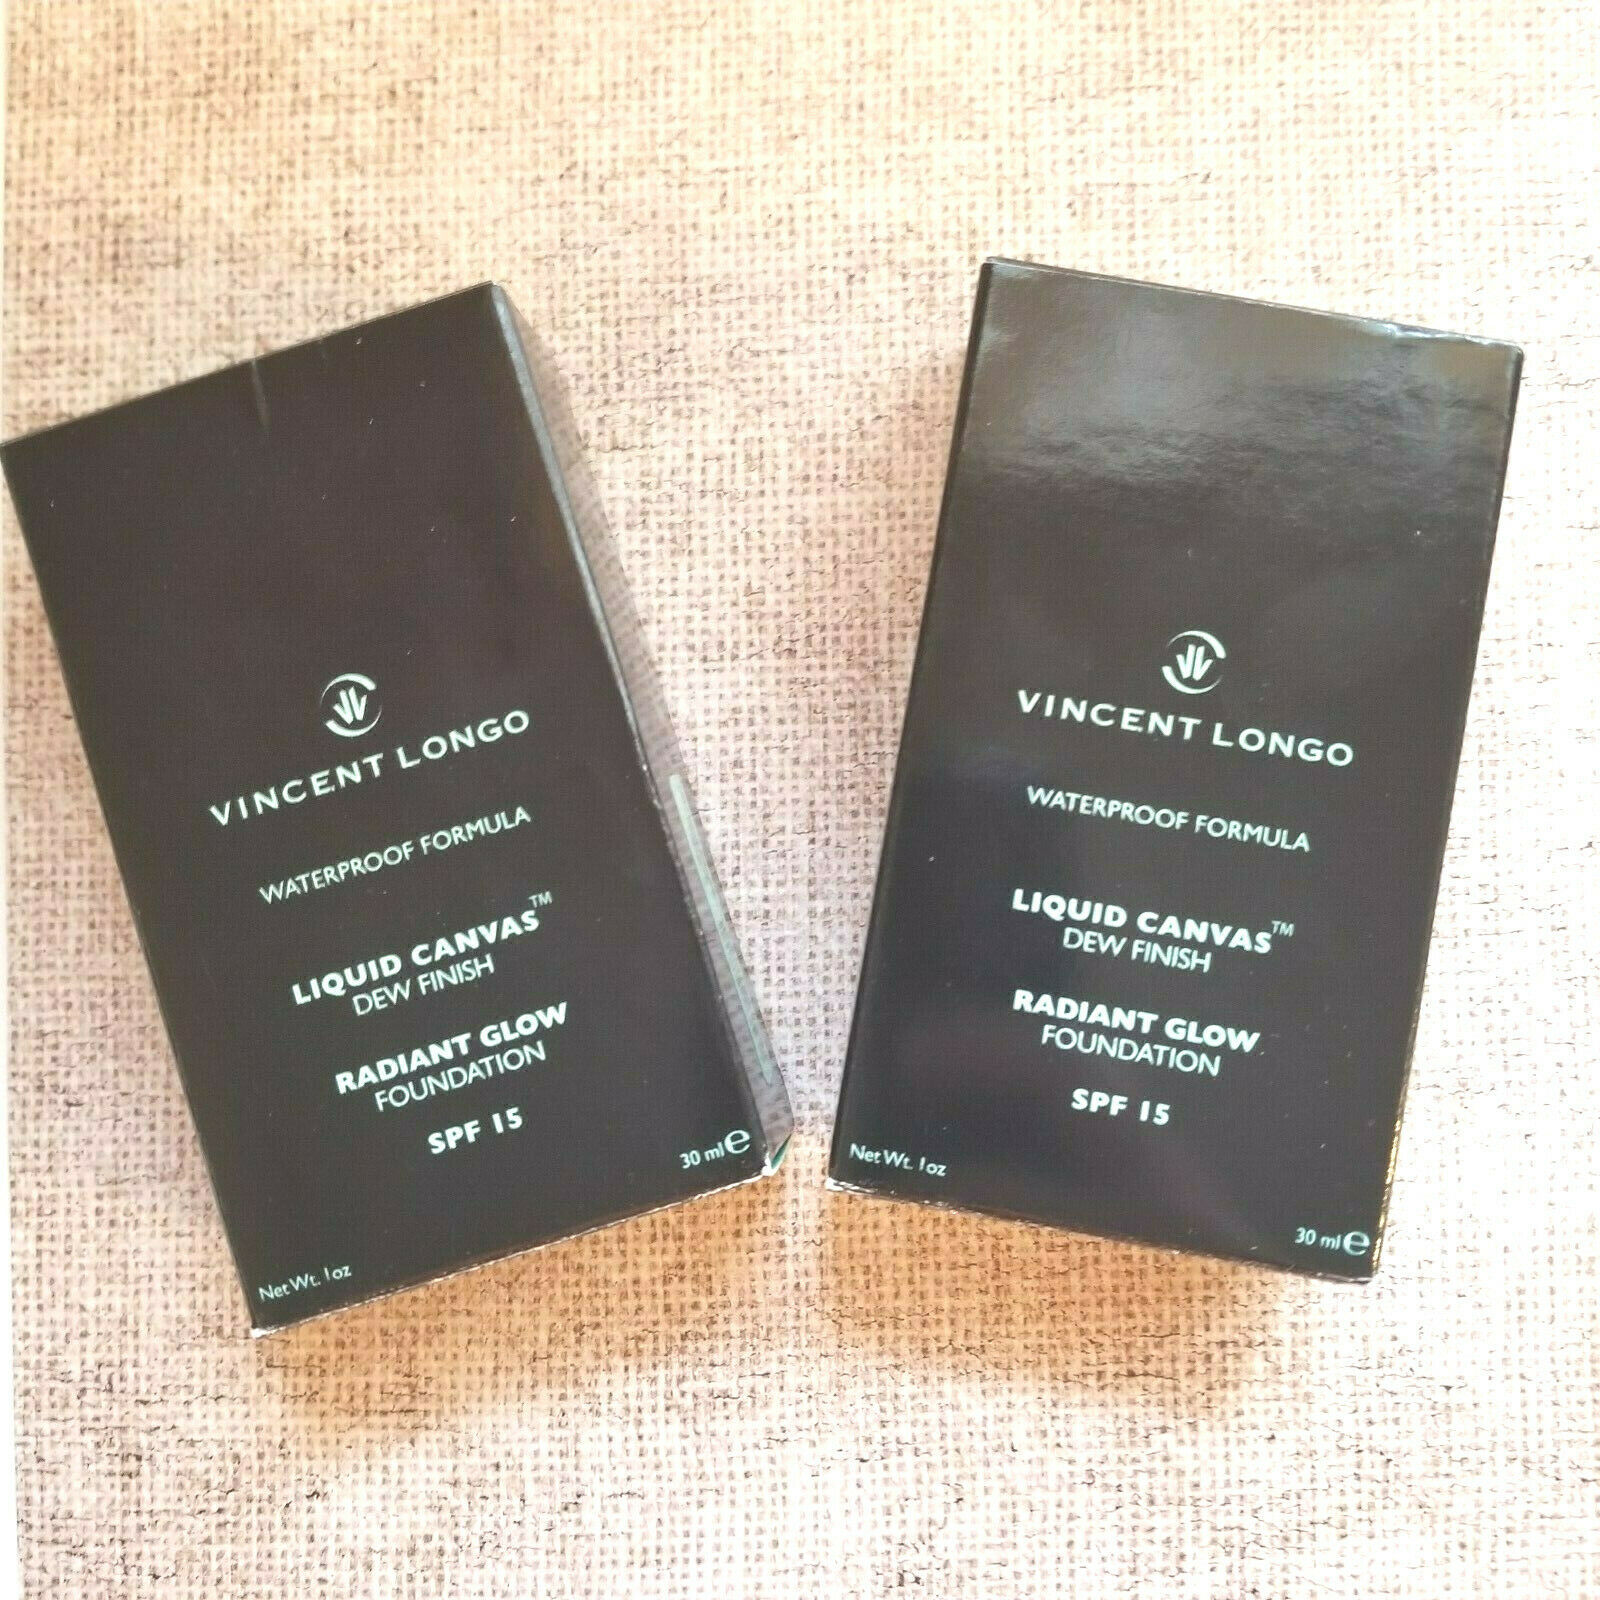 Primary image for Vincent Longo Liquid Canvas Dew Finish Radiant Foundation Golden Sienna Lot of 2